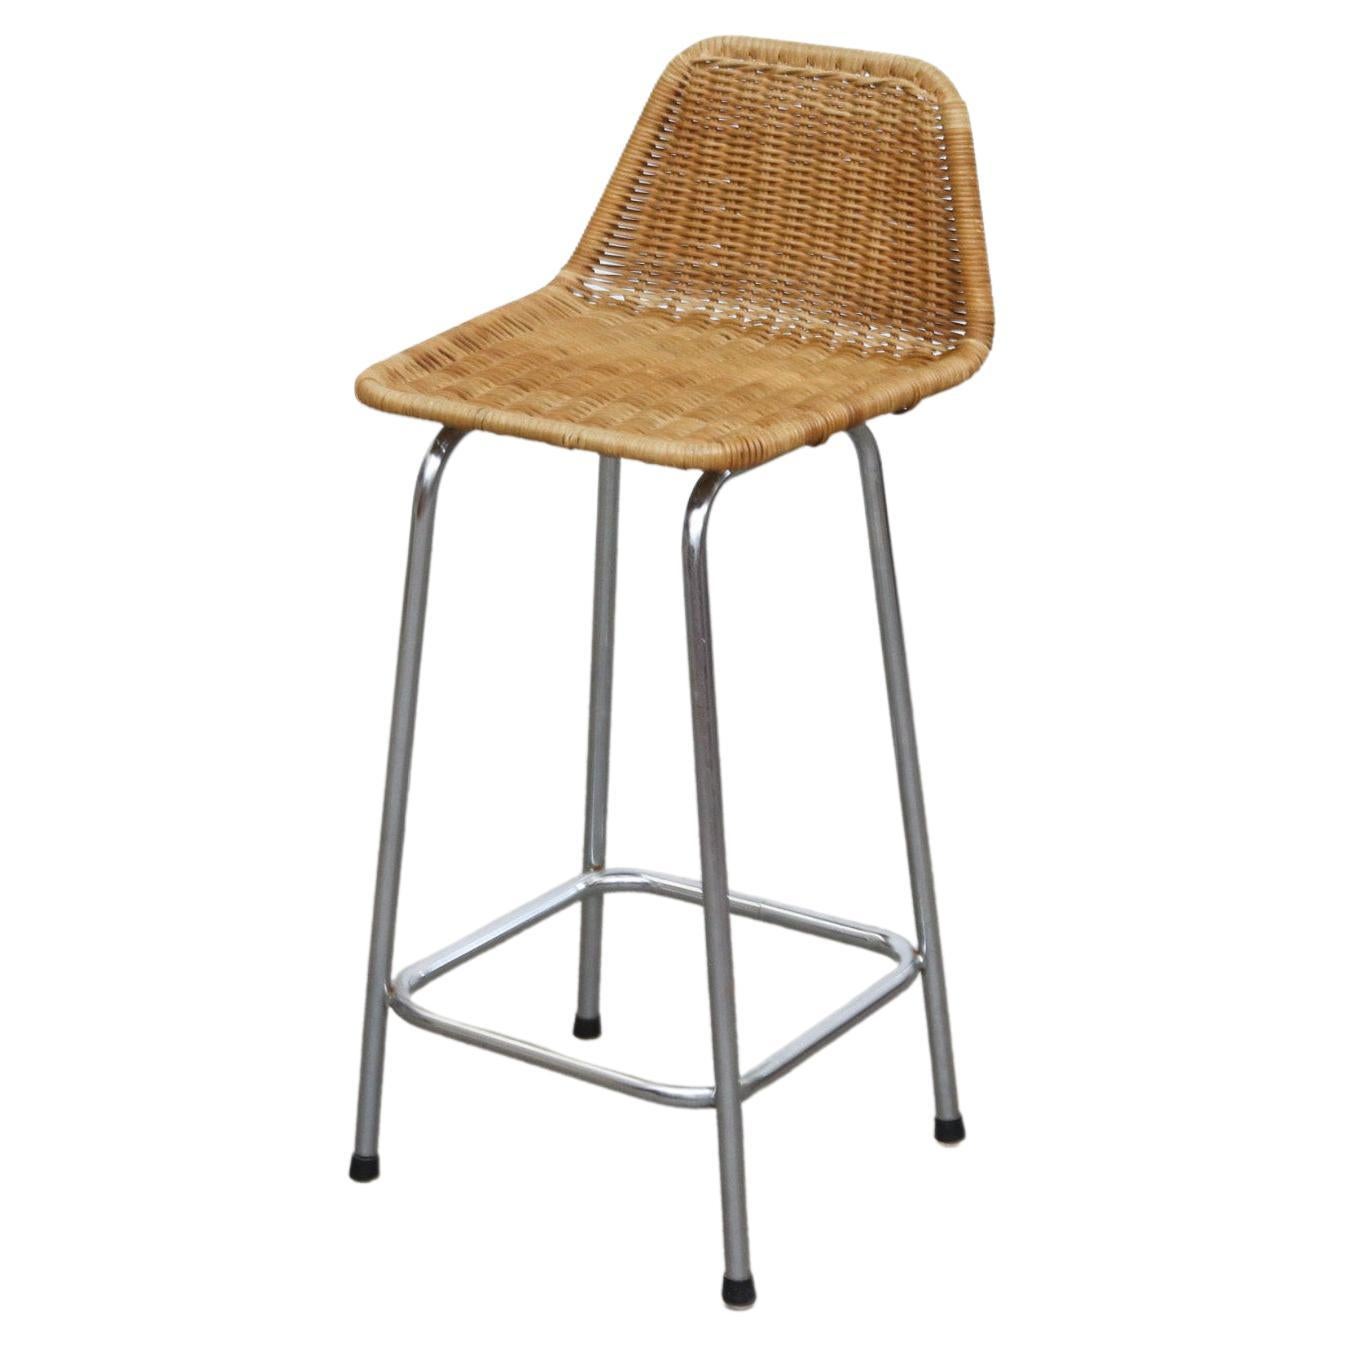 Charlotte Perriand Style Wicker Counter Height Stool with Chrome Legs